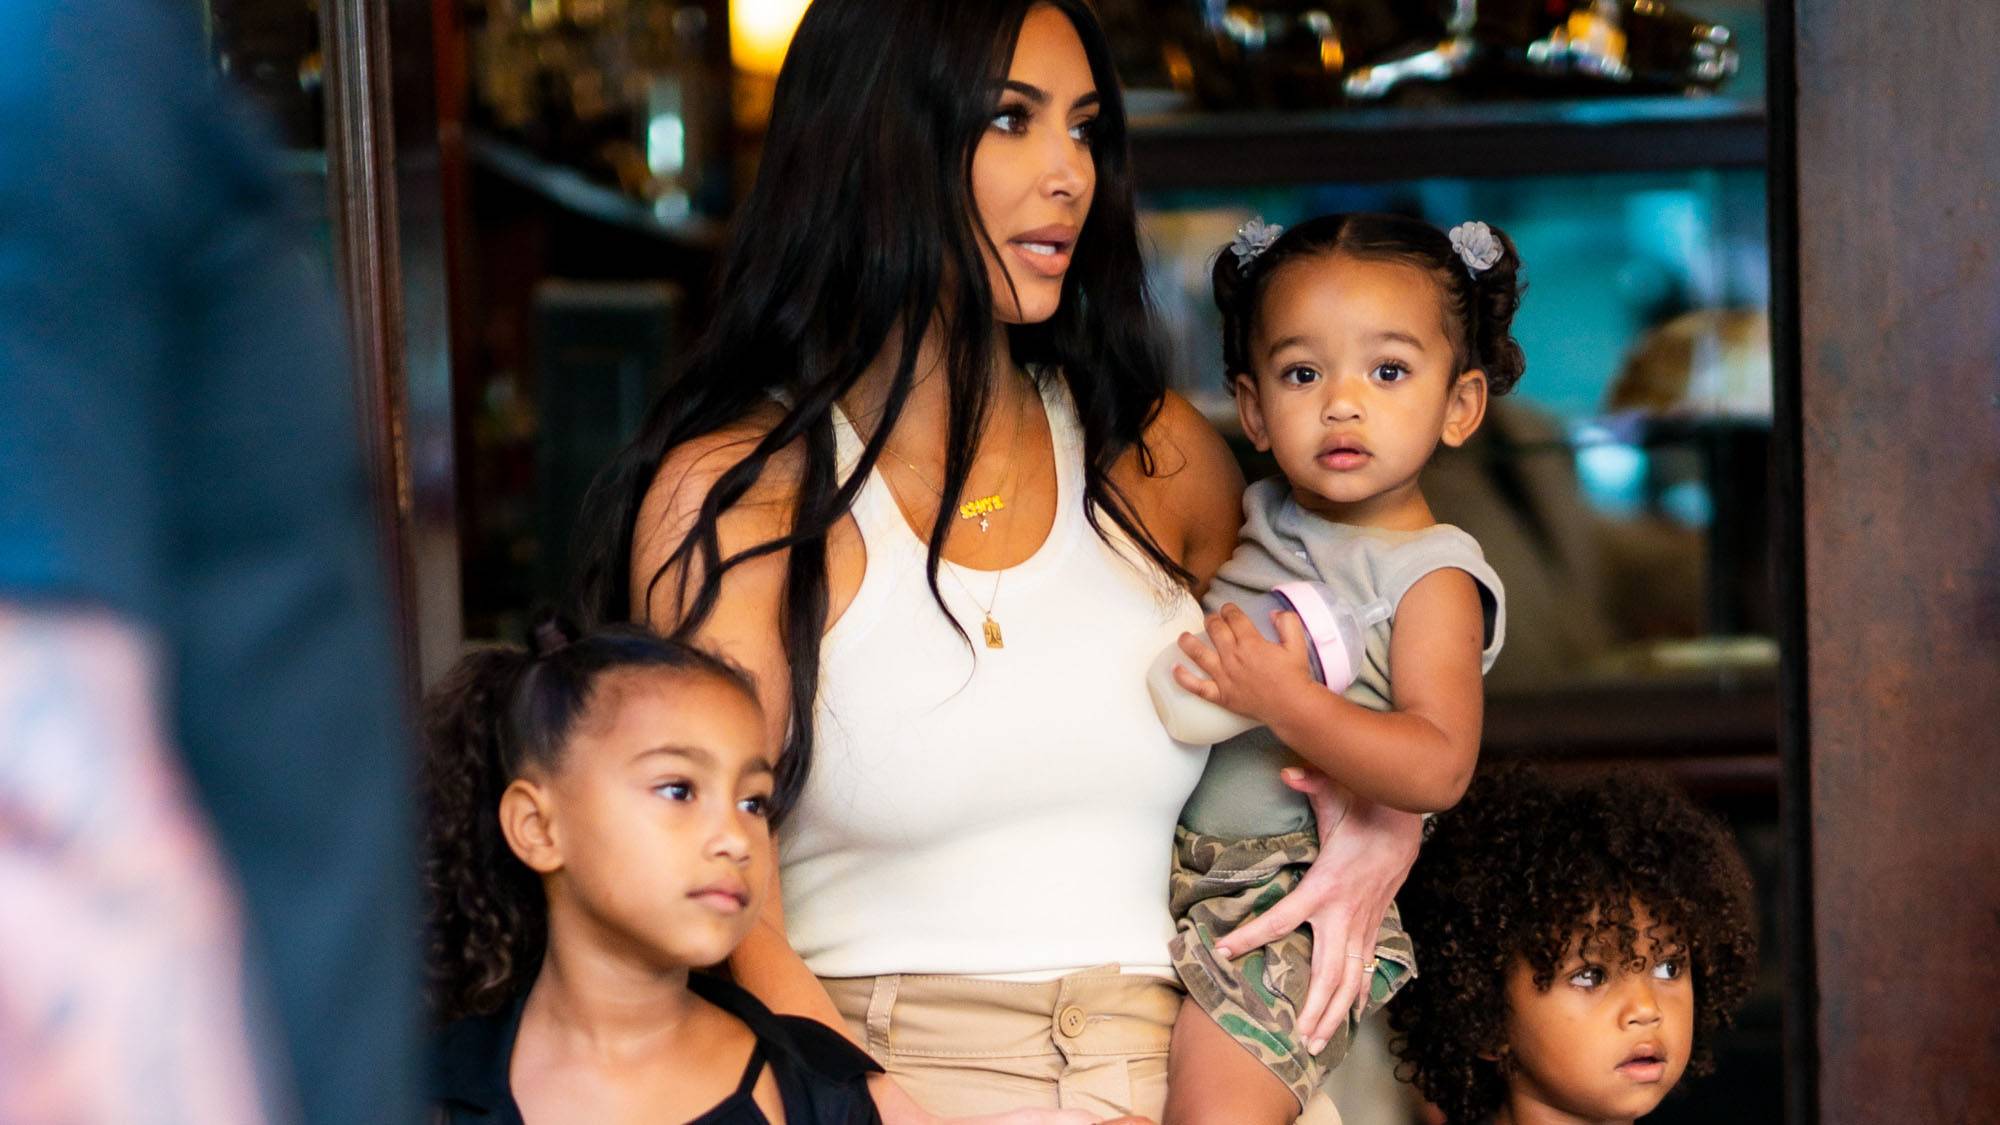 Kim Kardashian-West and Kanye West Announce the Name of Their Fourth Child